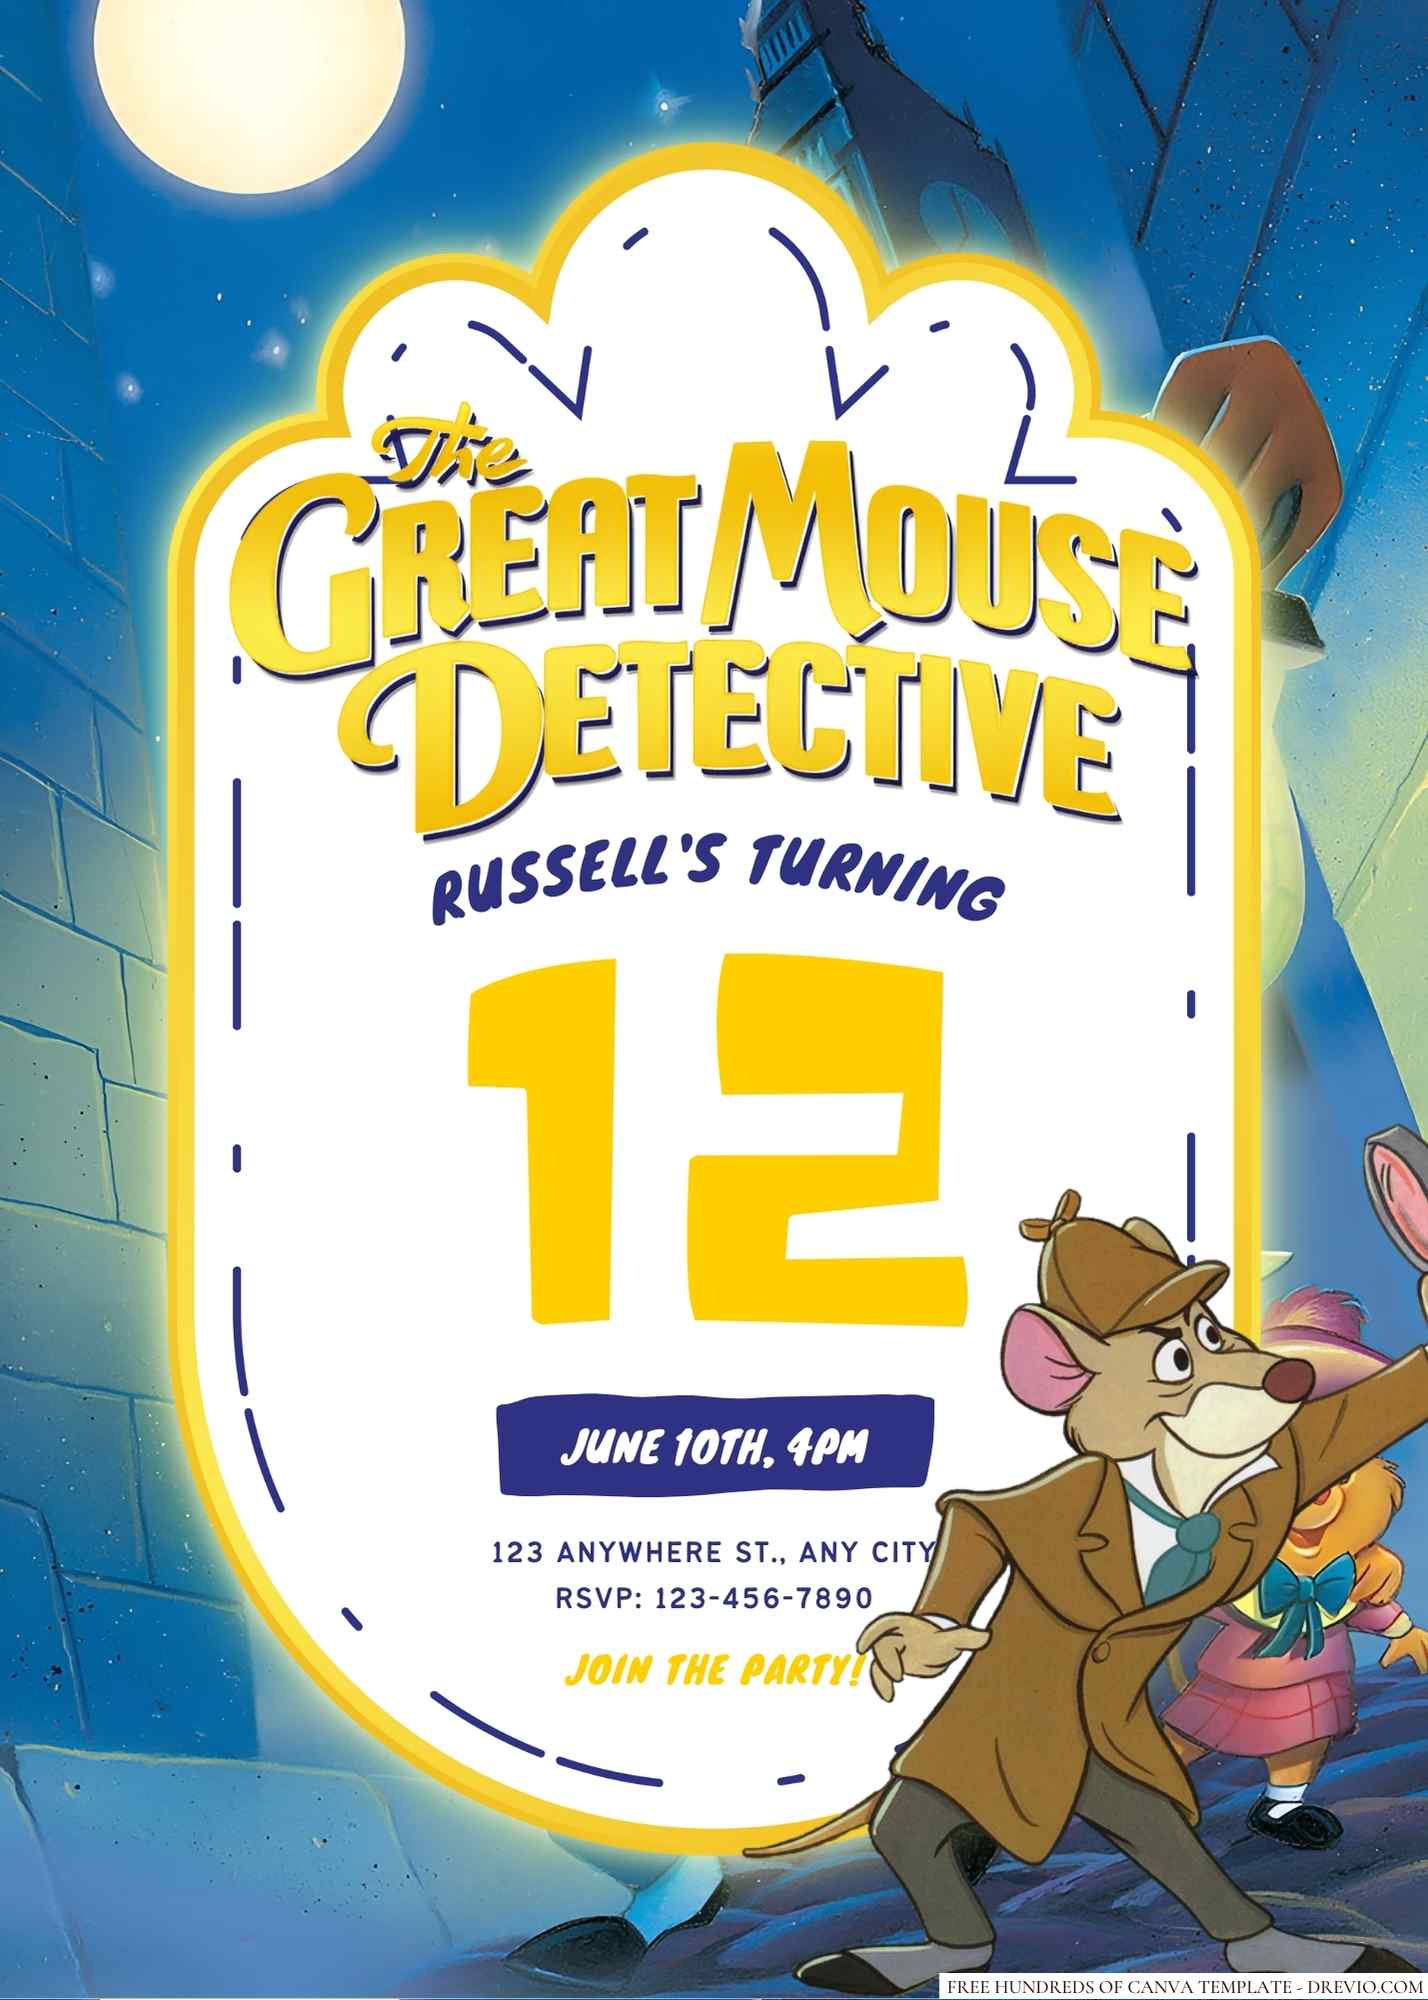 the great mouse detective poster